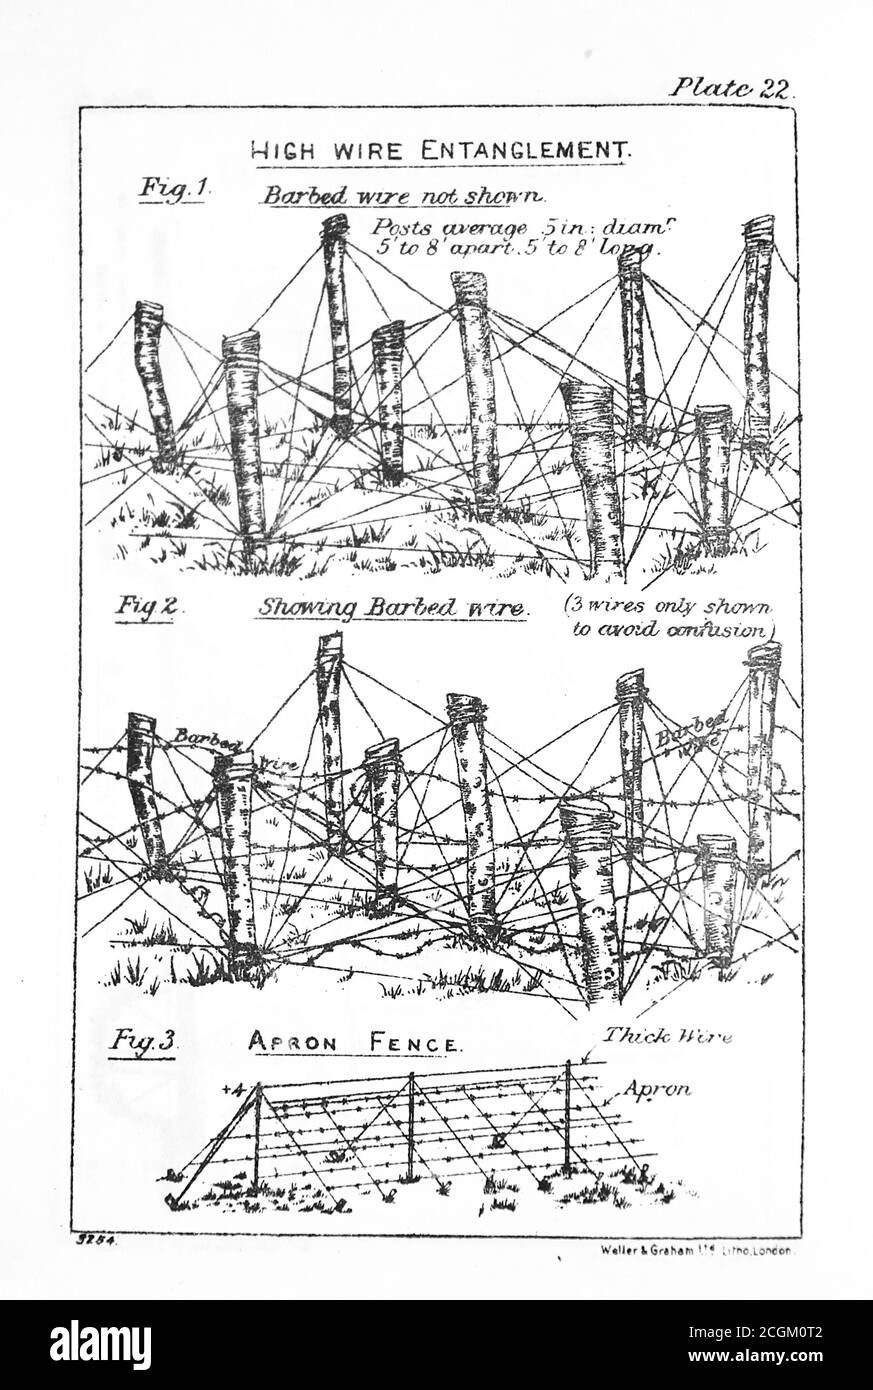 An illustration showing a plan for construction high wire entanglements for barbed wire, from the Manual of Field Engineering 1911 covering standard military egineering tasks for the British Army used throughout the Frist World War (1914-1918). Stock Photo